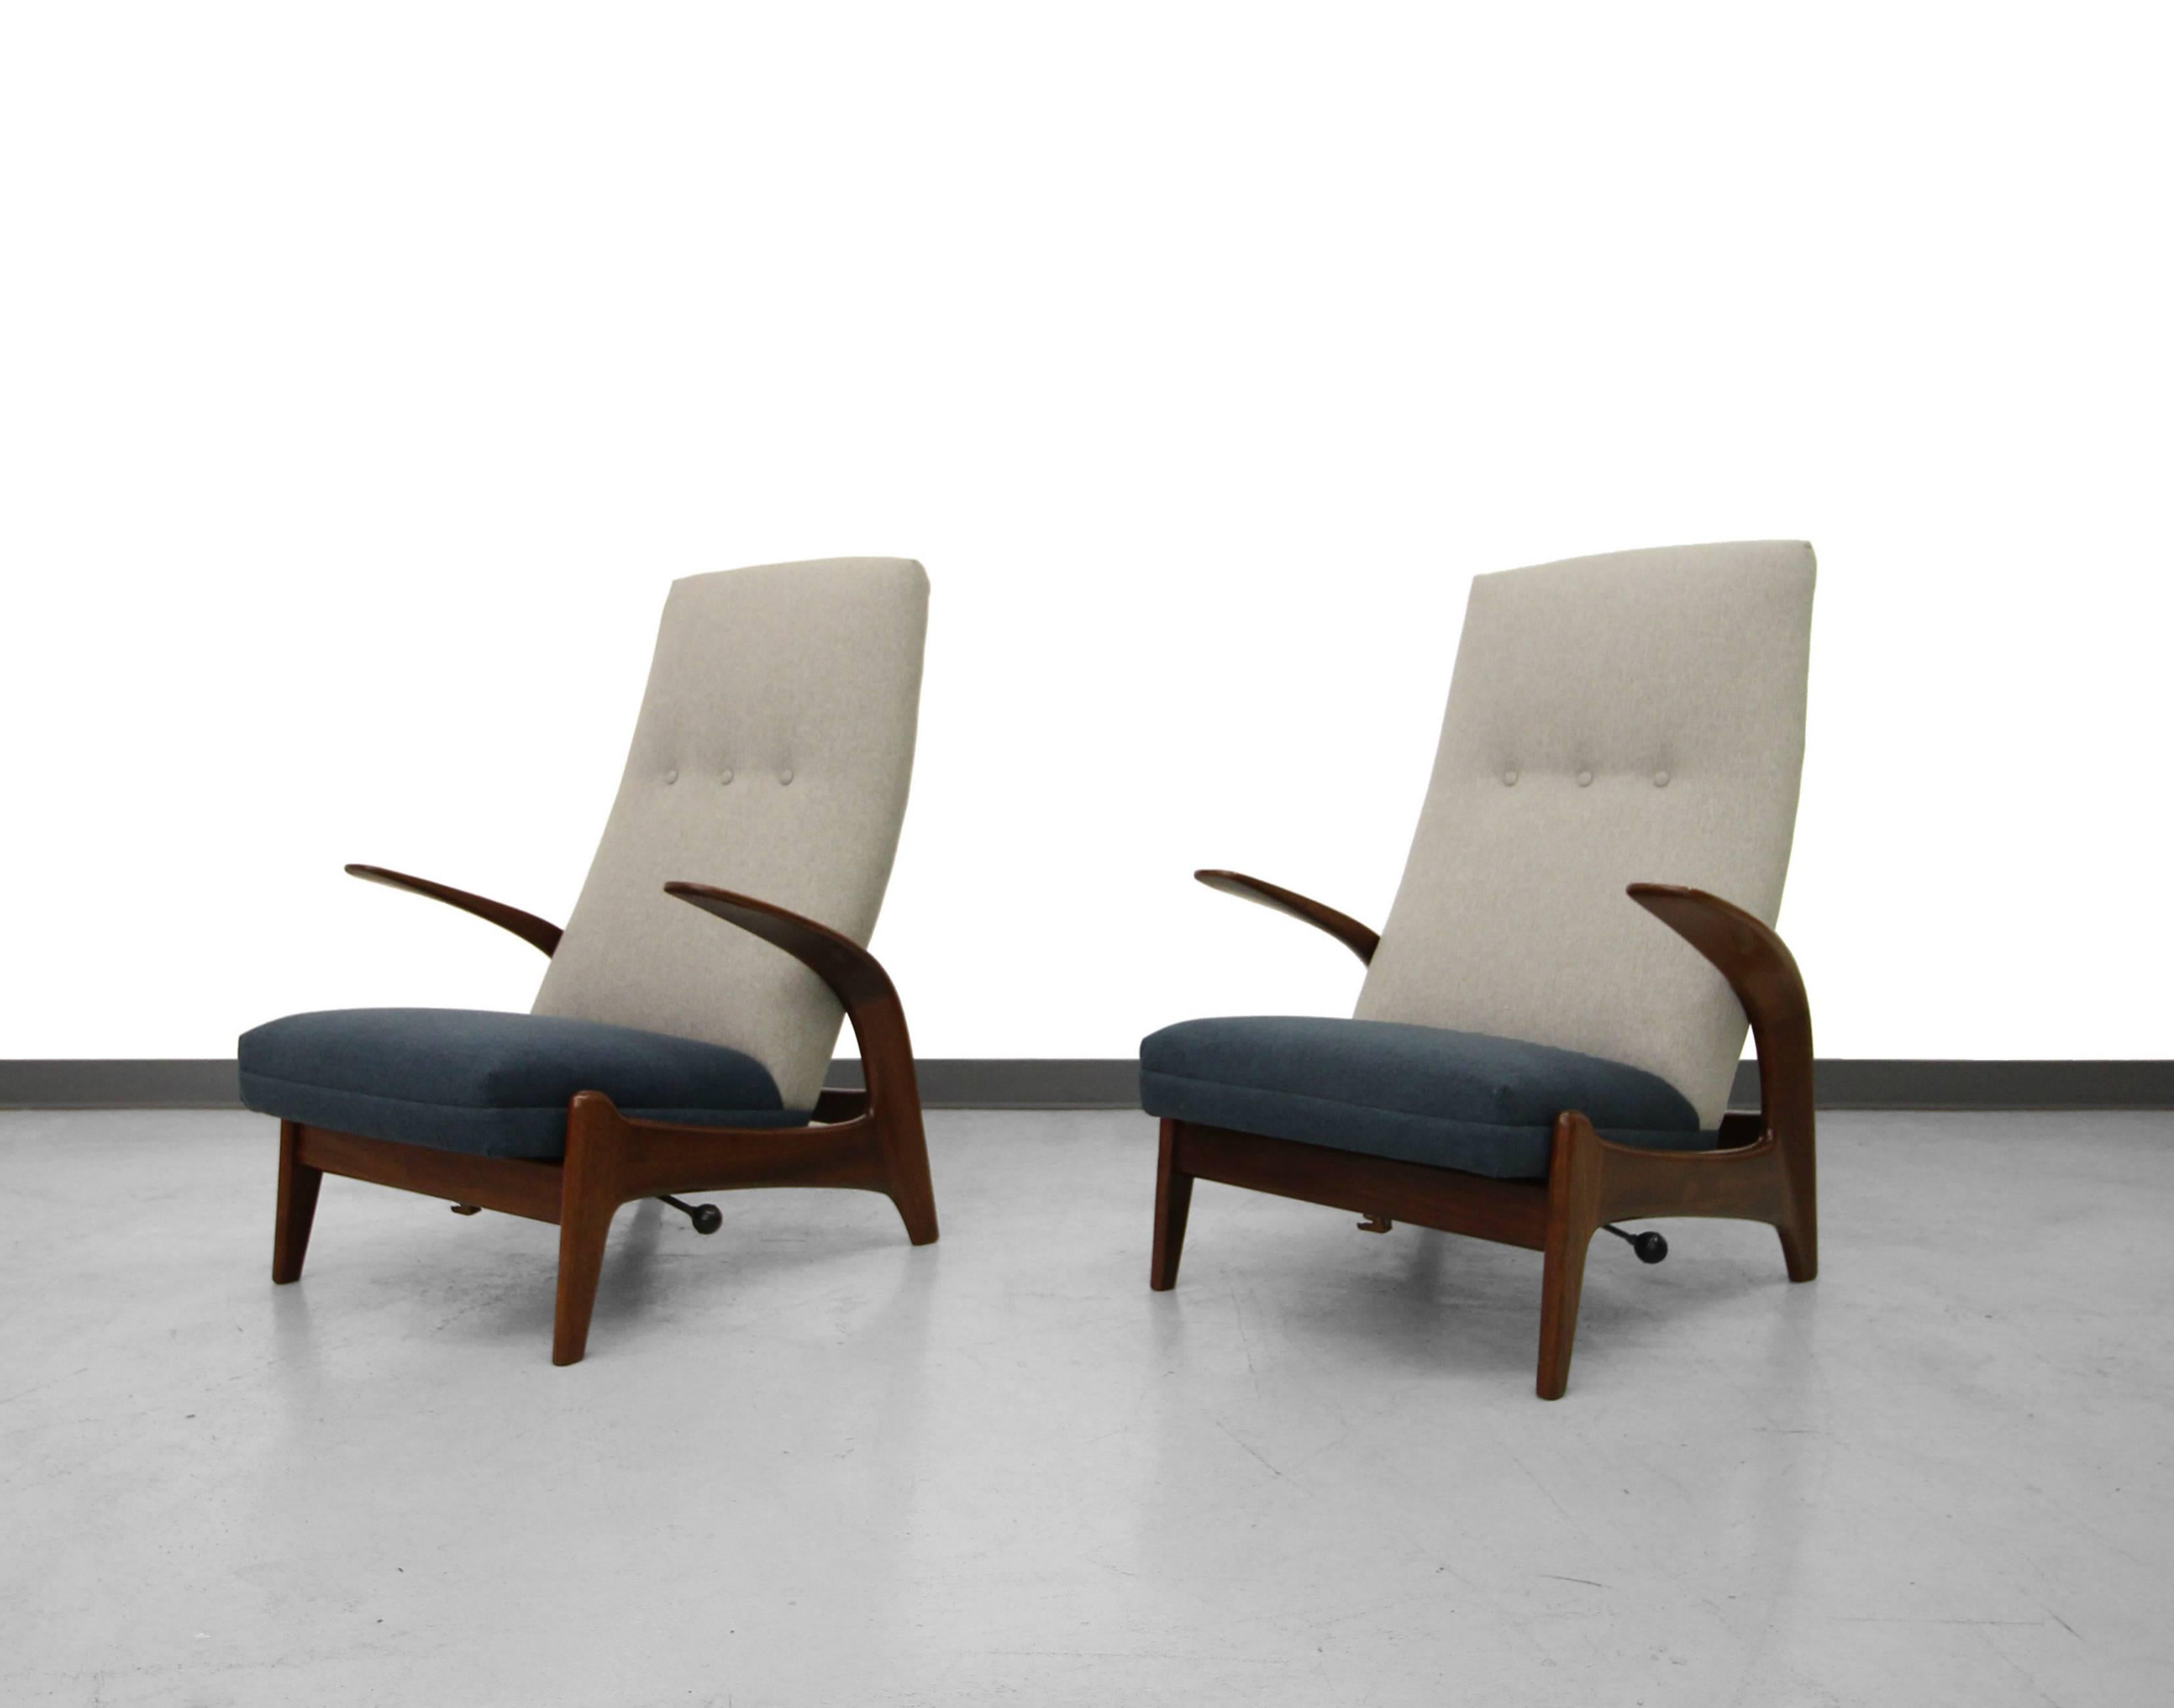 Absolutely stunning pair of high back, sculptural rocking reclining lounge chairs, designed in Norway and manufactured in the UK by Gimson Slater. Chairs feature a rocking and locking mechanism that allows the chairs to rock or be reclined in to one